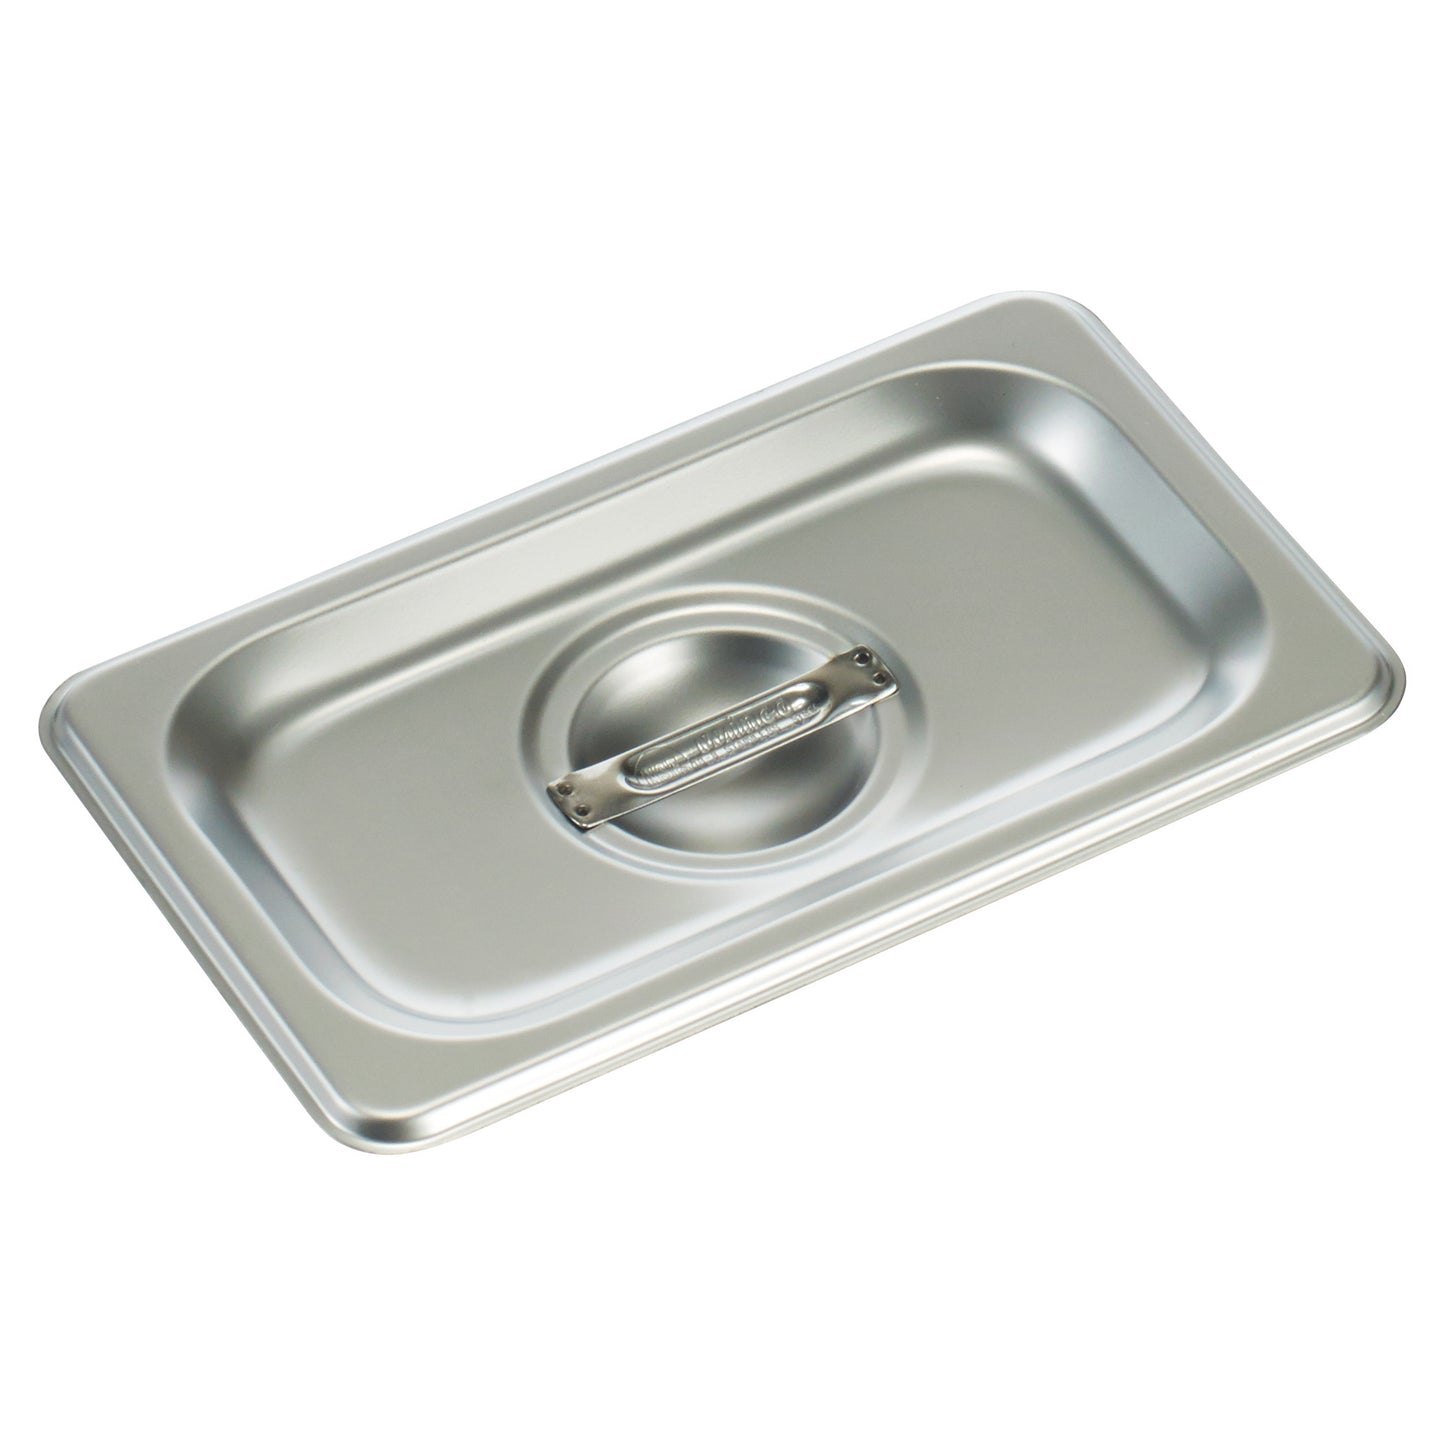 SPSCN - 18/8 Stainless Steel Steam Pan Cover, Solid - Ninth (1/9)